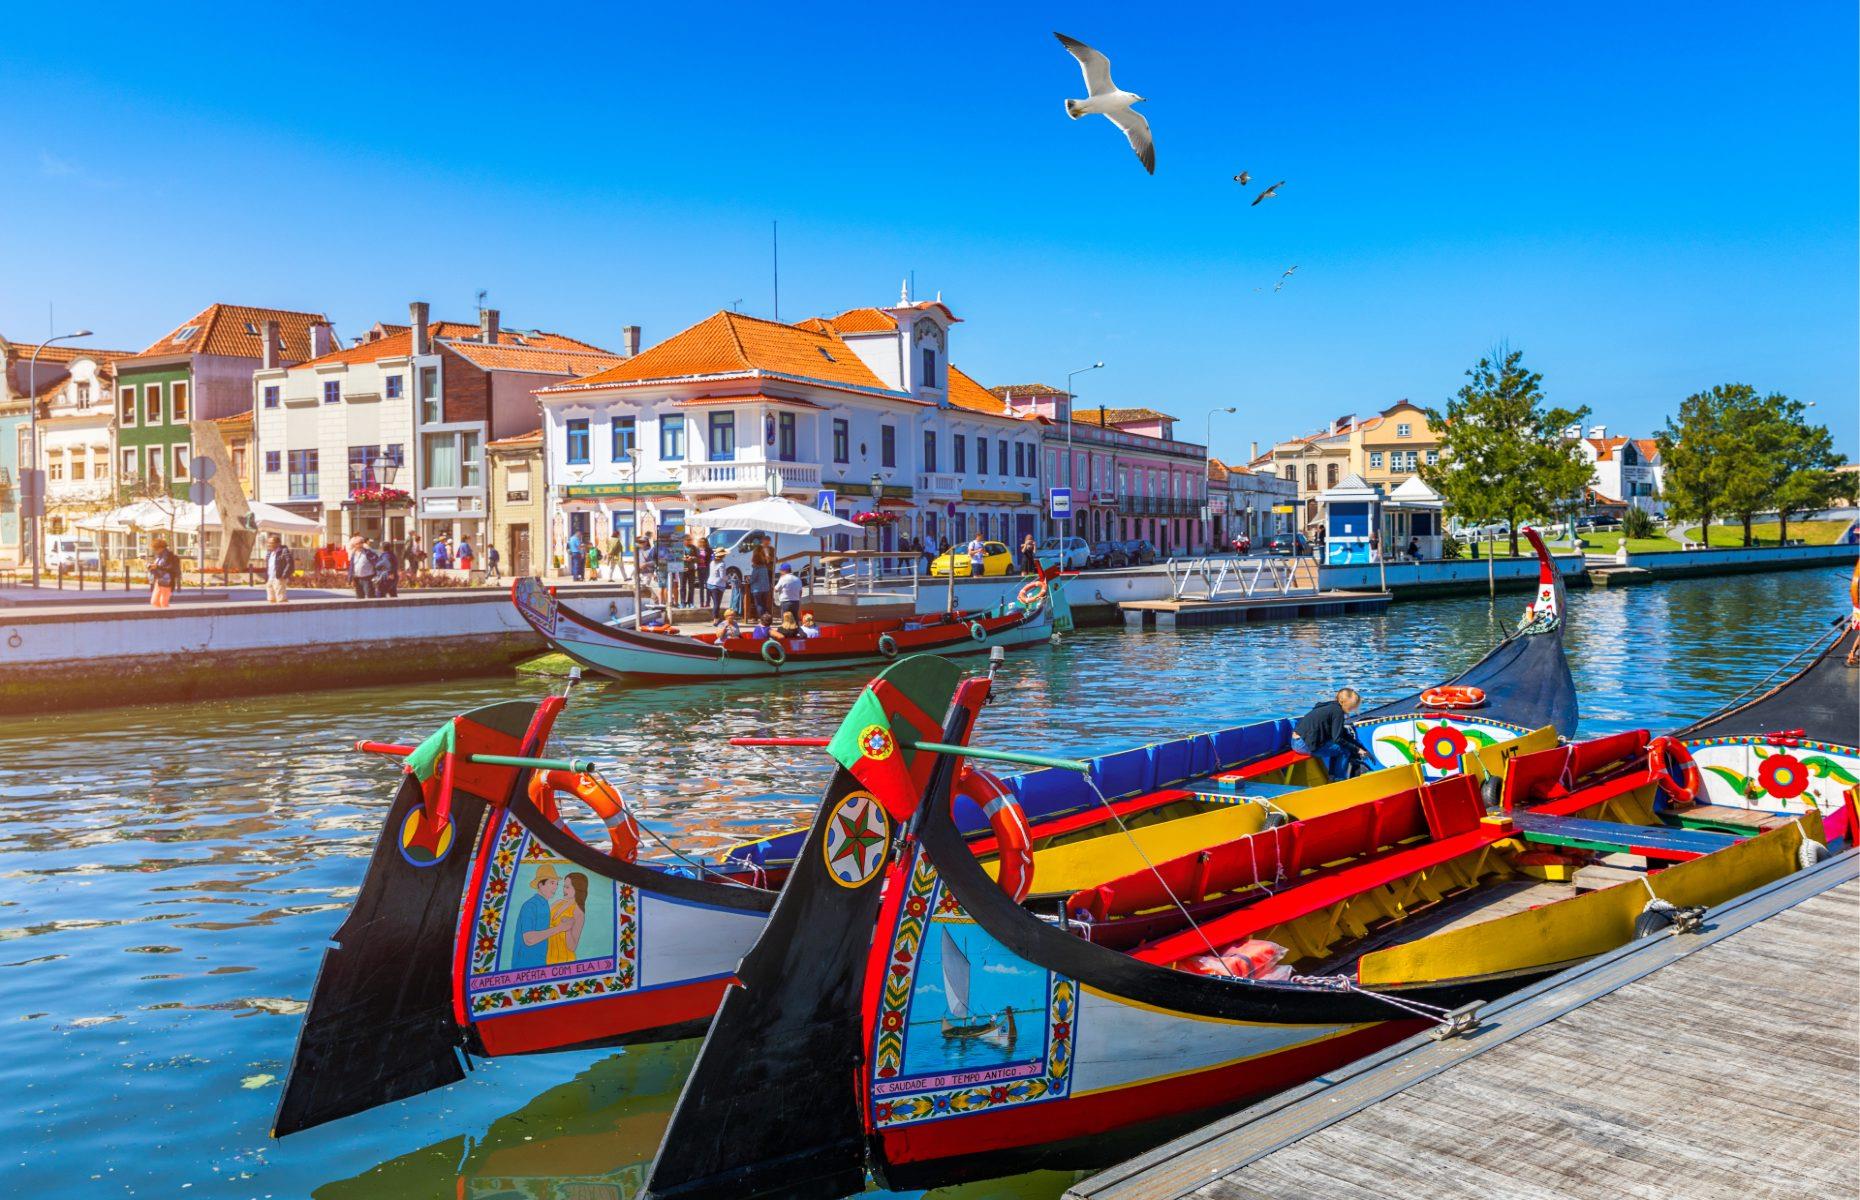 A city shaped by its waters, Aveiro can be found on Portugal’s west coast. Located along the Ria de Aveiro lagoon, the city is characterized by its small network of waterways. The canals are mostly used by gondola-style boats known as ‘moliceiros’ that were traditionally used for gathering kelp and seaweed. Surrounded by gorgeous Art Nouveau buildings reflected in the main canal, and dotted with colorful boats, Aveiro is one of the most romantic destinations in the world.